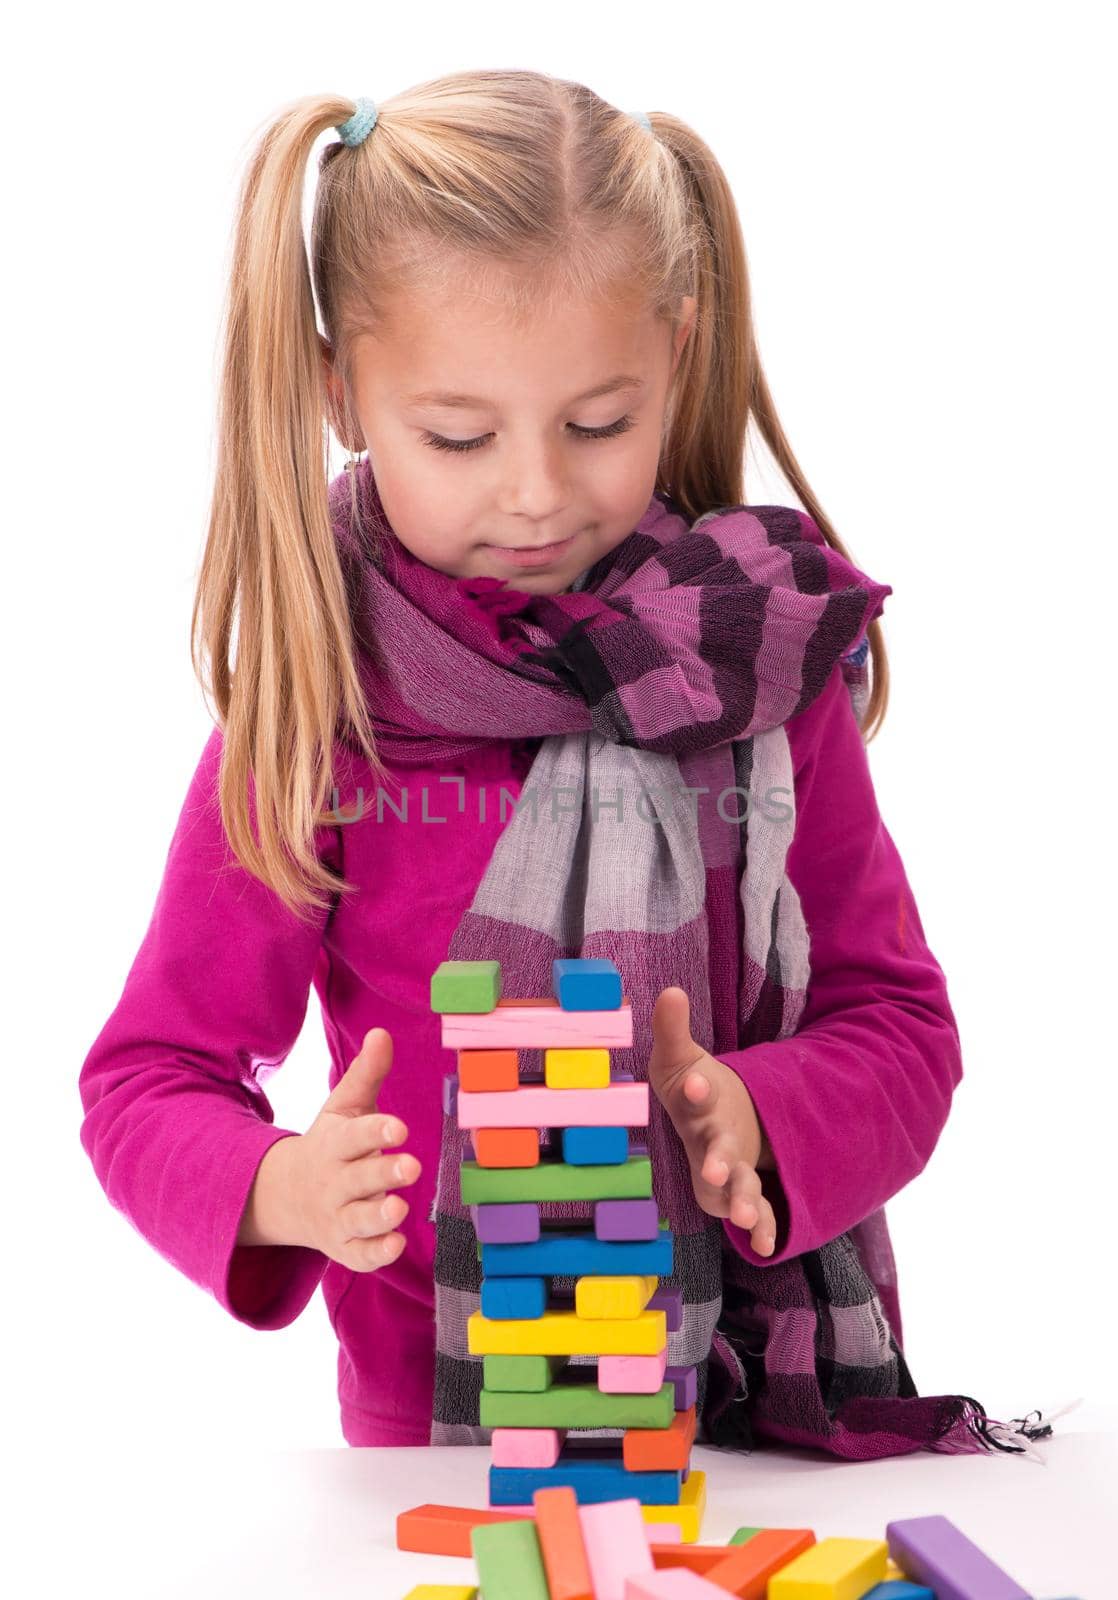 Children's hobbies, creativity, a little girl in a blue dress playing with the wood game jenga on white background by aprilphoto